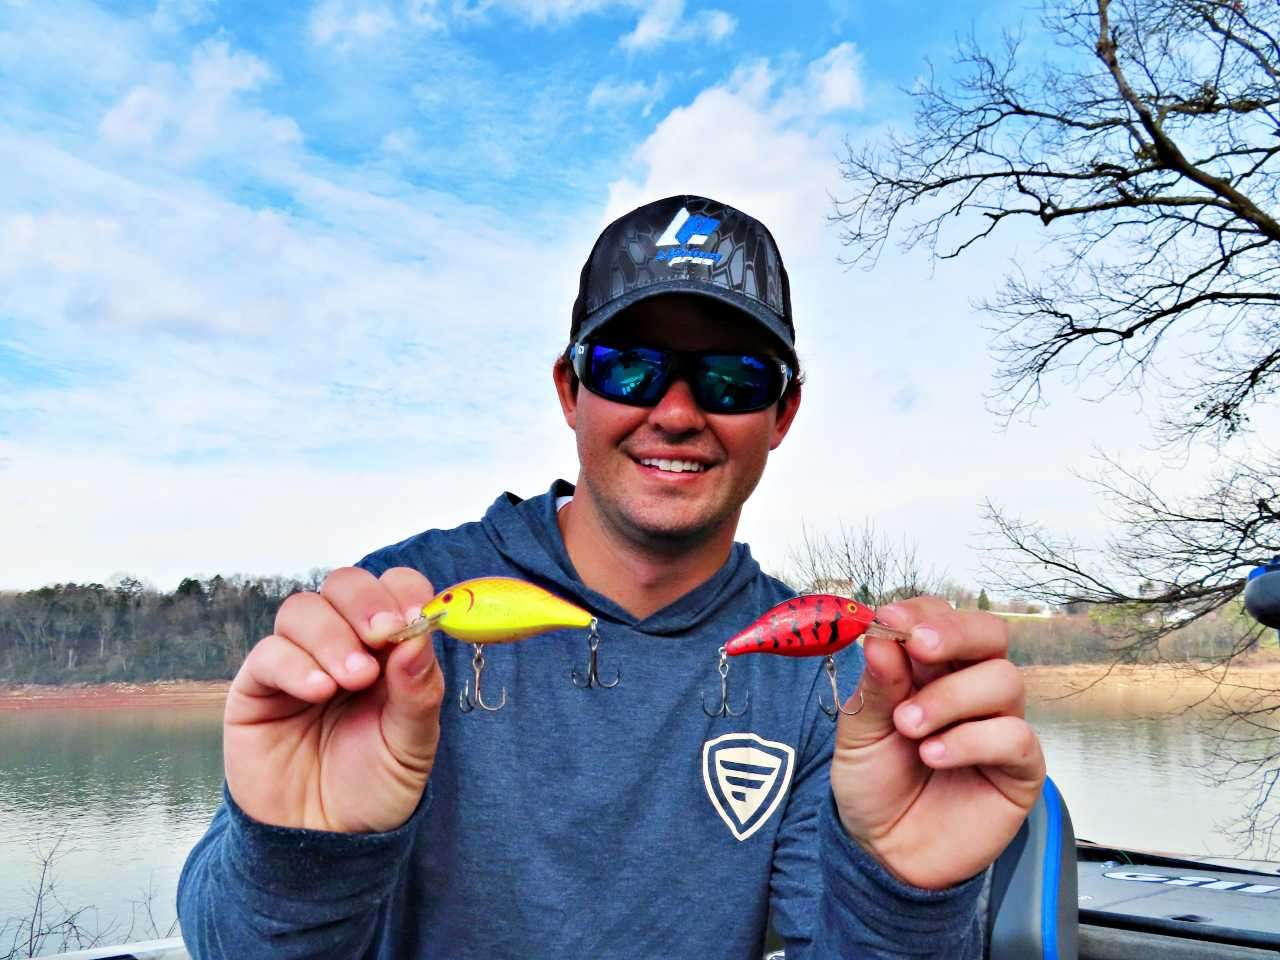 Runoff from springtime rains creates dirty water, and squarebill crankbaits are ideal for attracting reaction strikes. 
